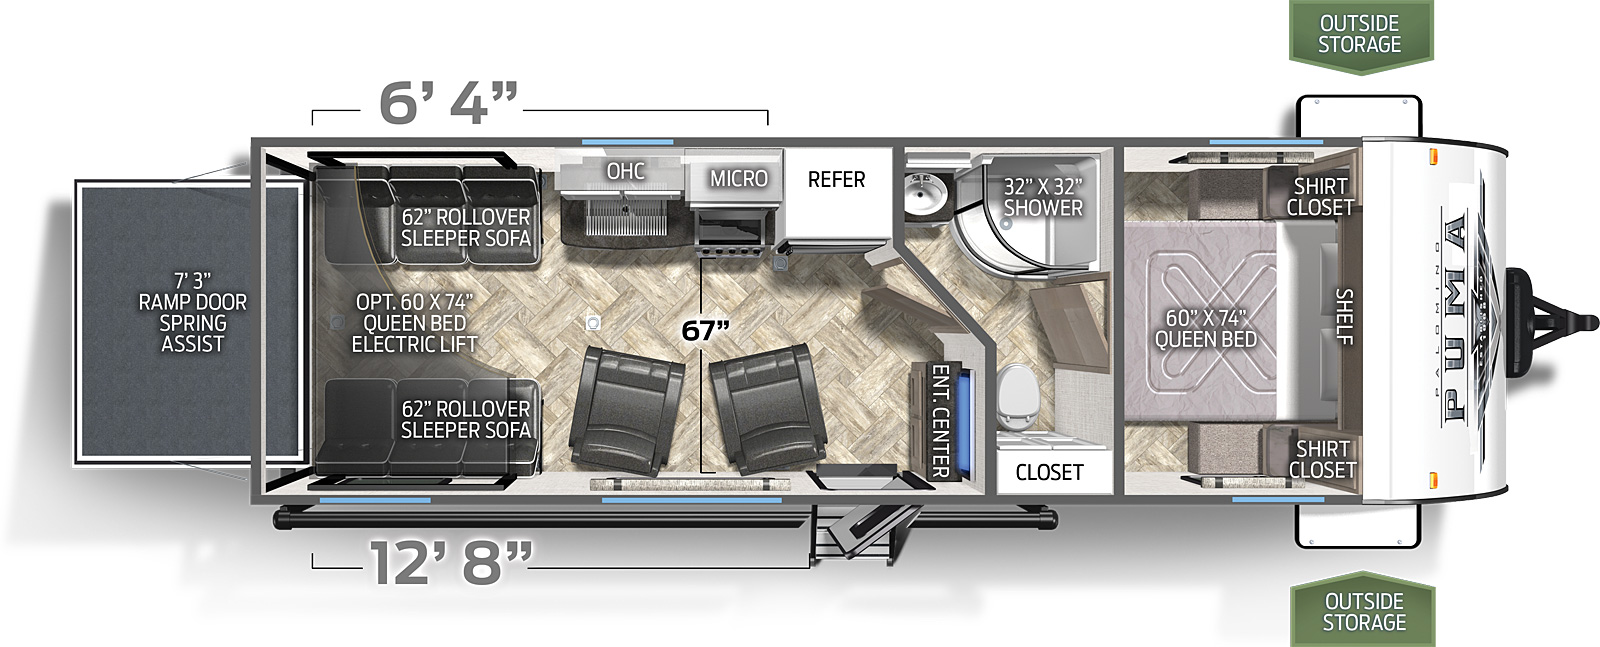 The 24FBC has no slide outs. Exterior features include an 18 foot awning. Interior layout from the front to back: front bedroom with a queen bed; pass through full bathroom; entertainment center; two swivel chair rockers; kitchen with refrigerator, microwave and cooktop stove; two roll-over sofas; optional queen bed electric lift system; ramp door.
